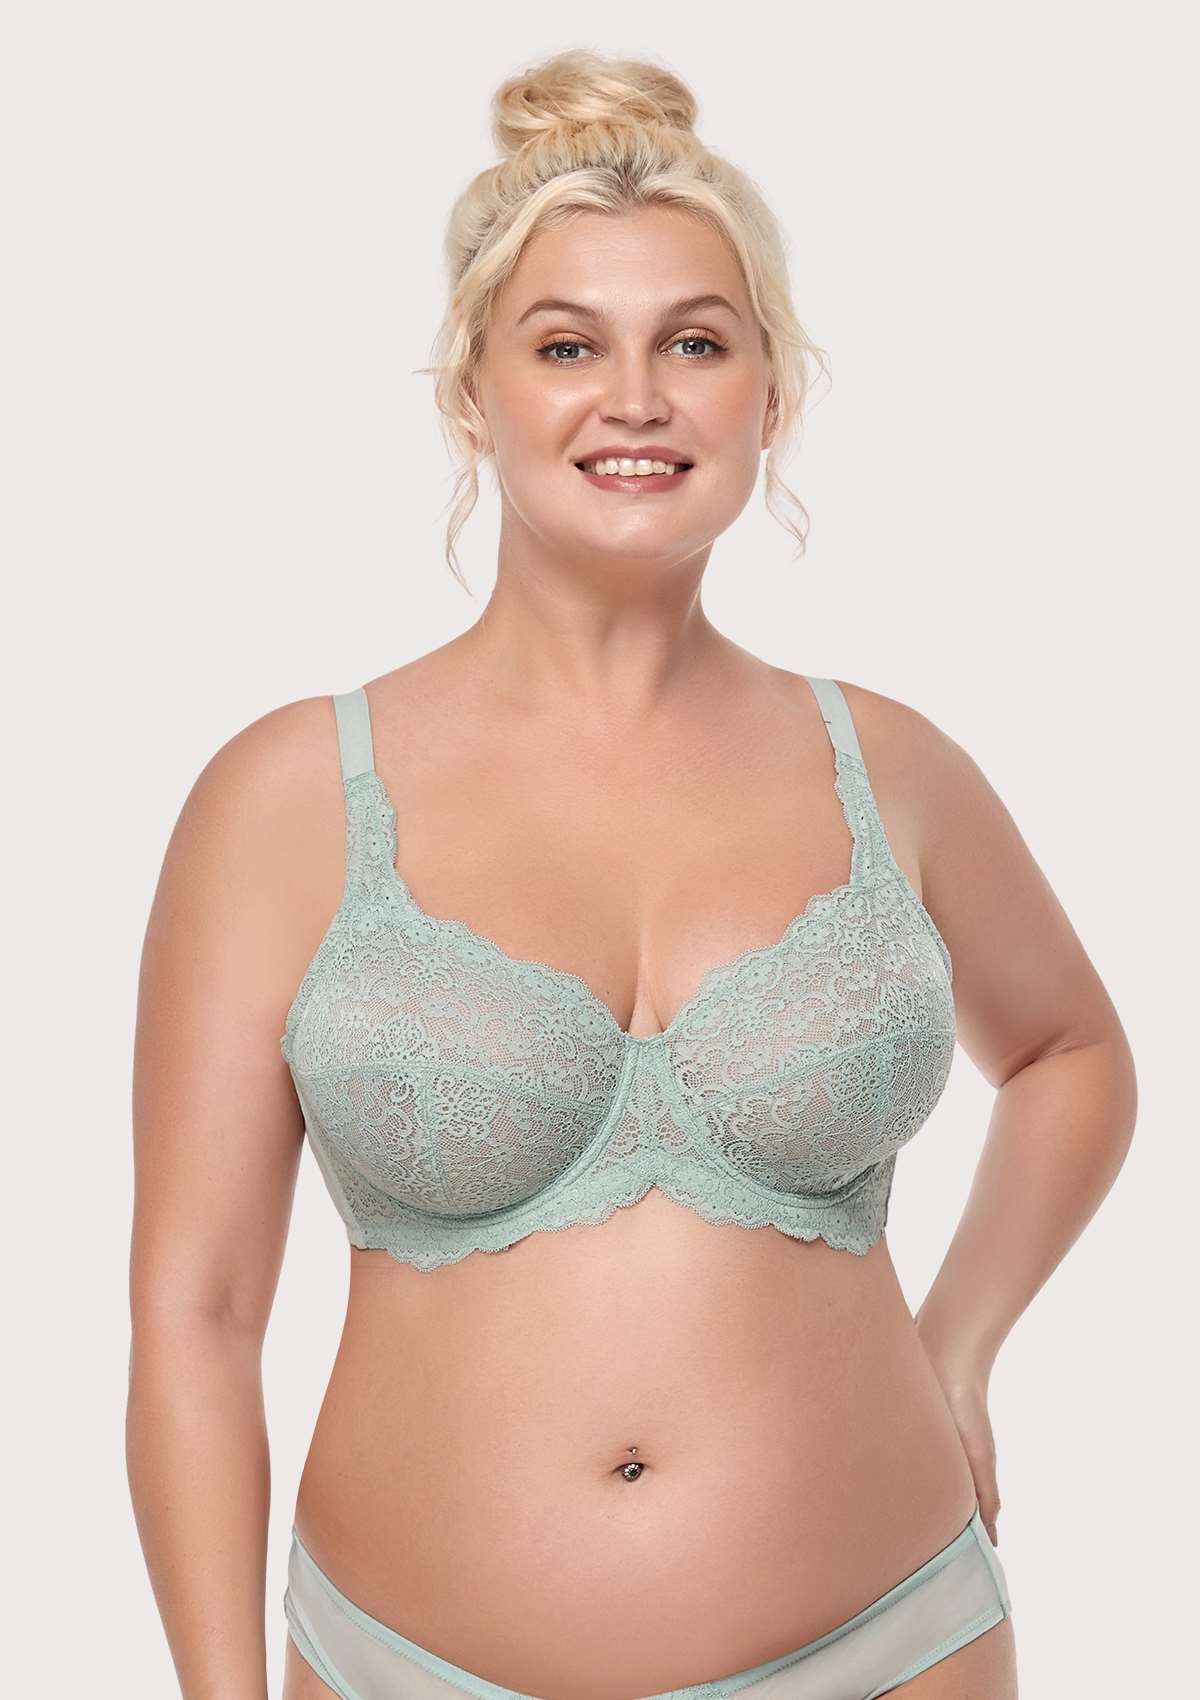 HSIA All-Over Floral Lace: Best Bra For Elderly With Sagging Breasts - Crystal Blue / 38 / C